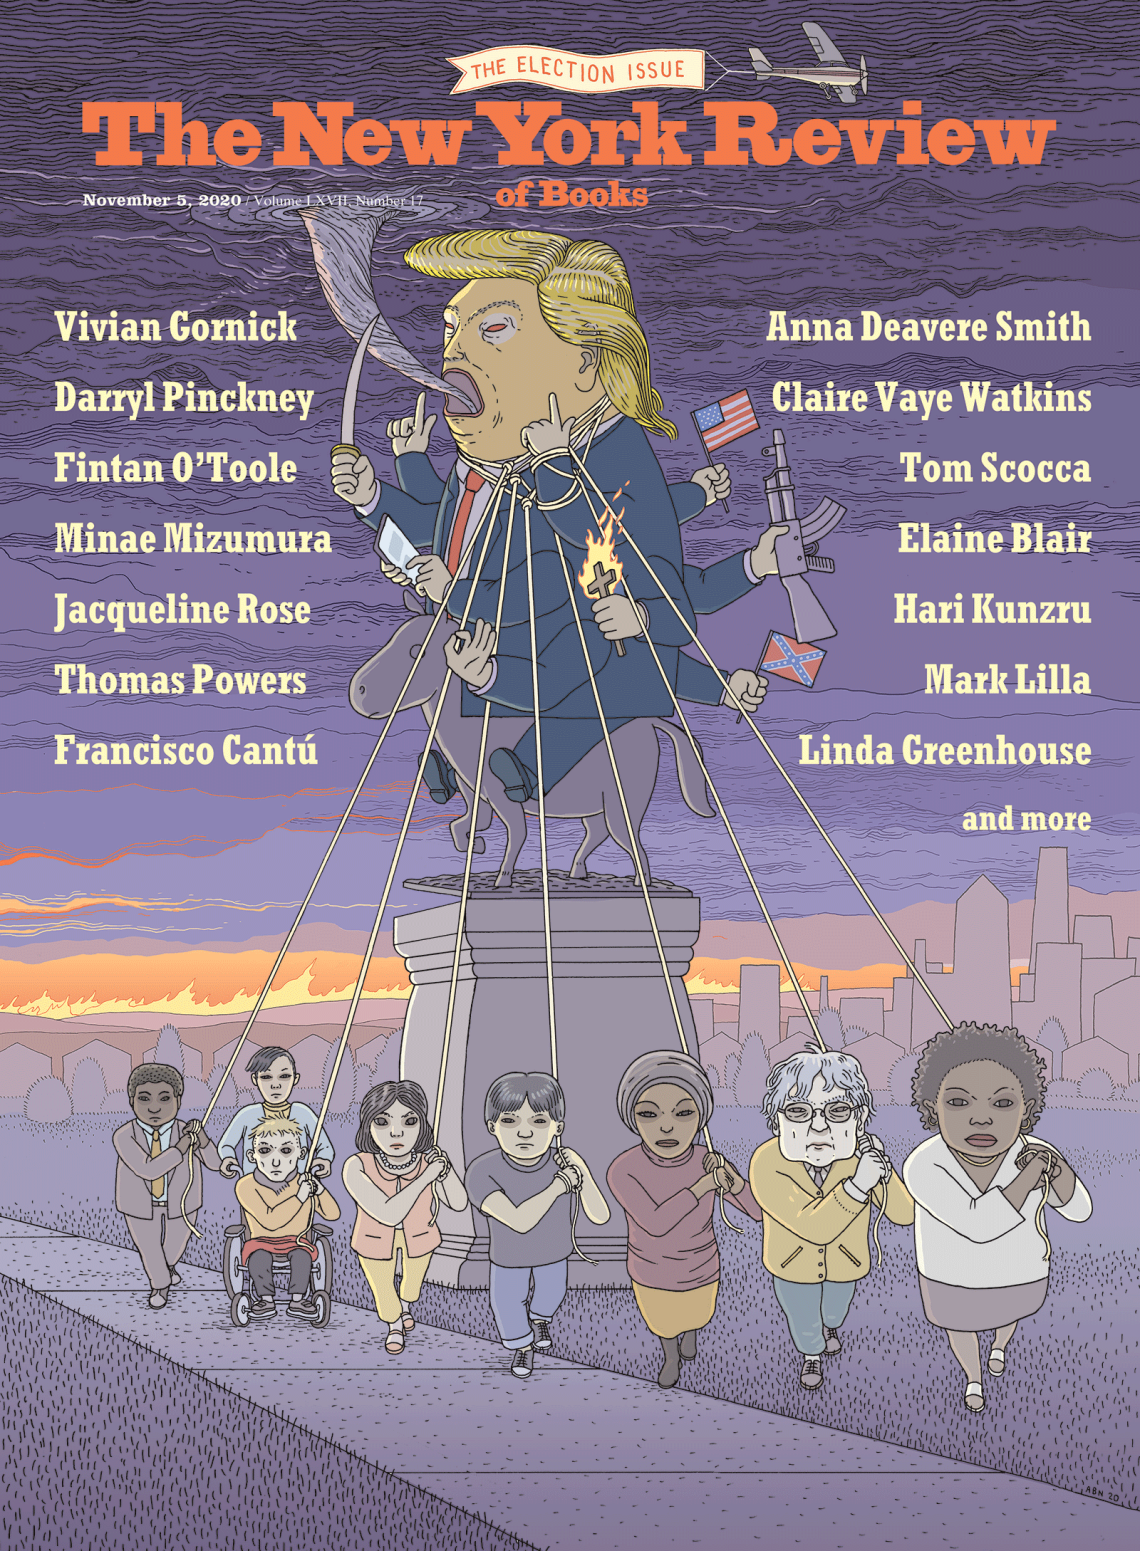 Image of the November 5, 2020 issue cover.